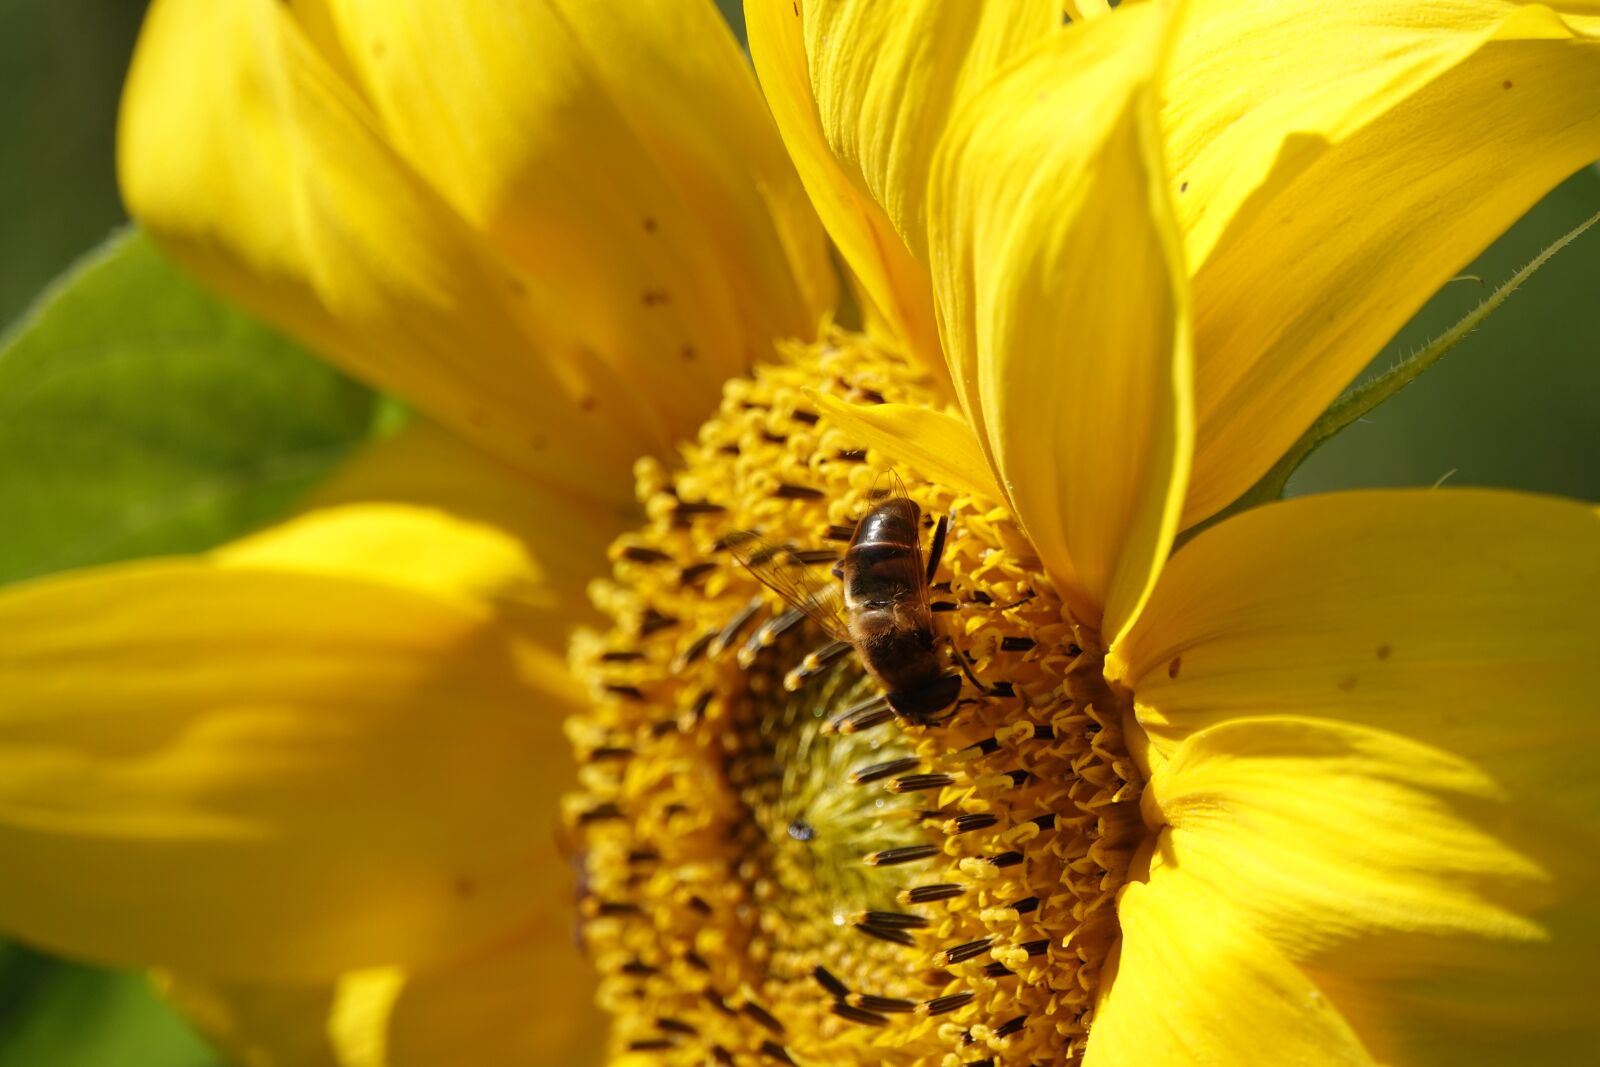 Sony Cyber-shot DSC-RX10 IV sample photo. Sunflower, bee, bees photography